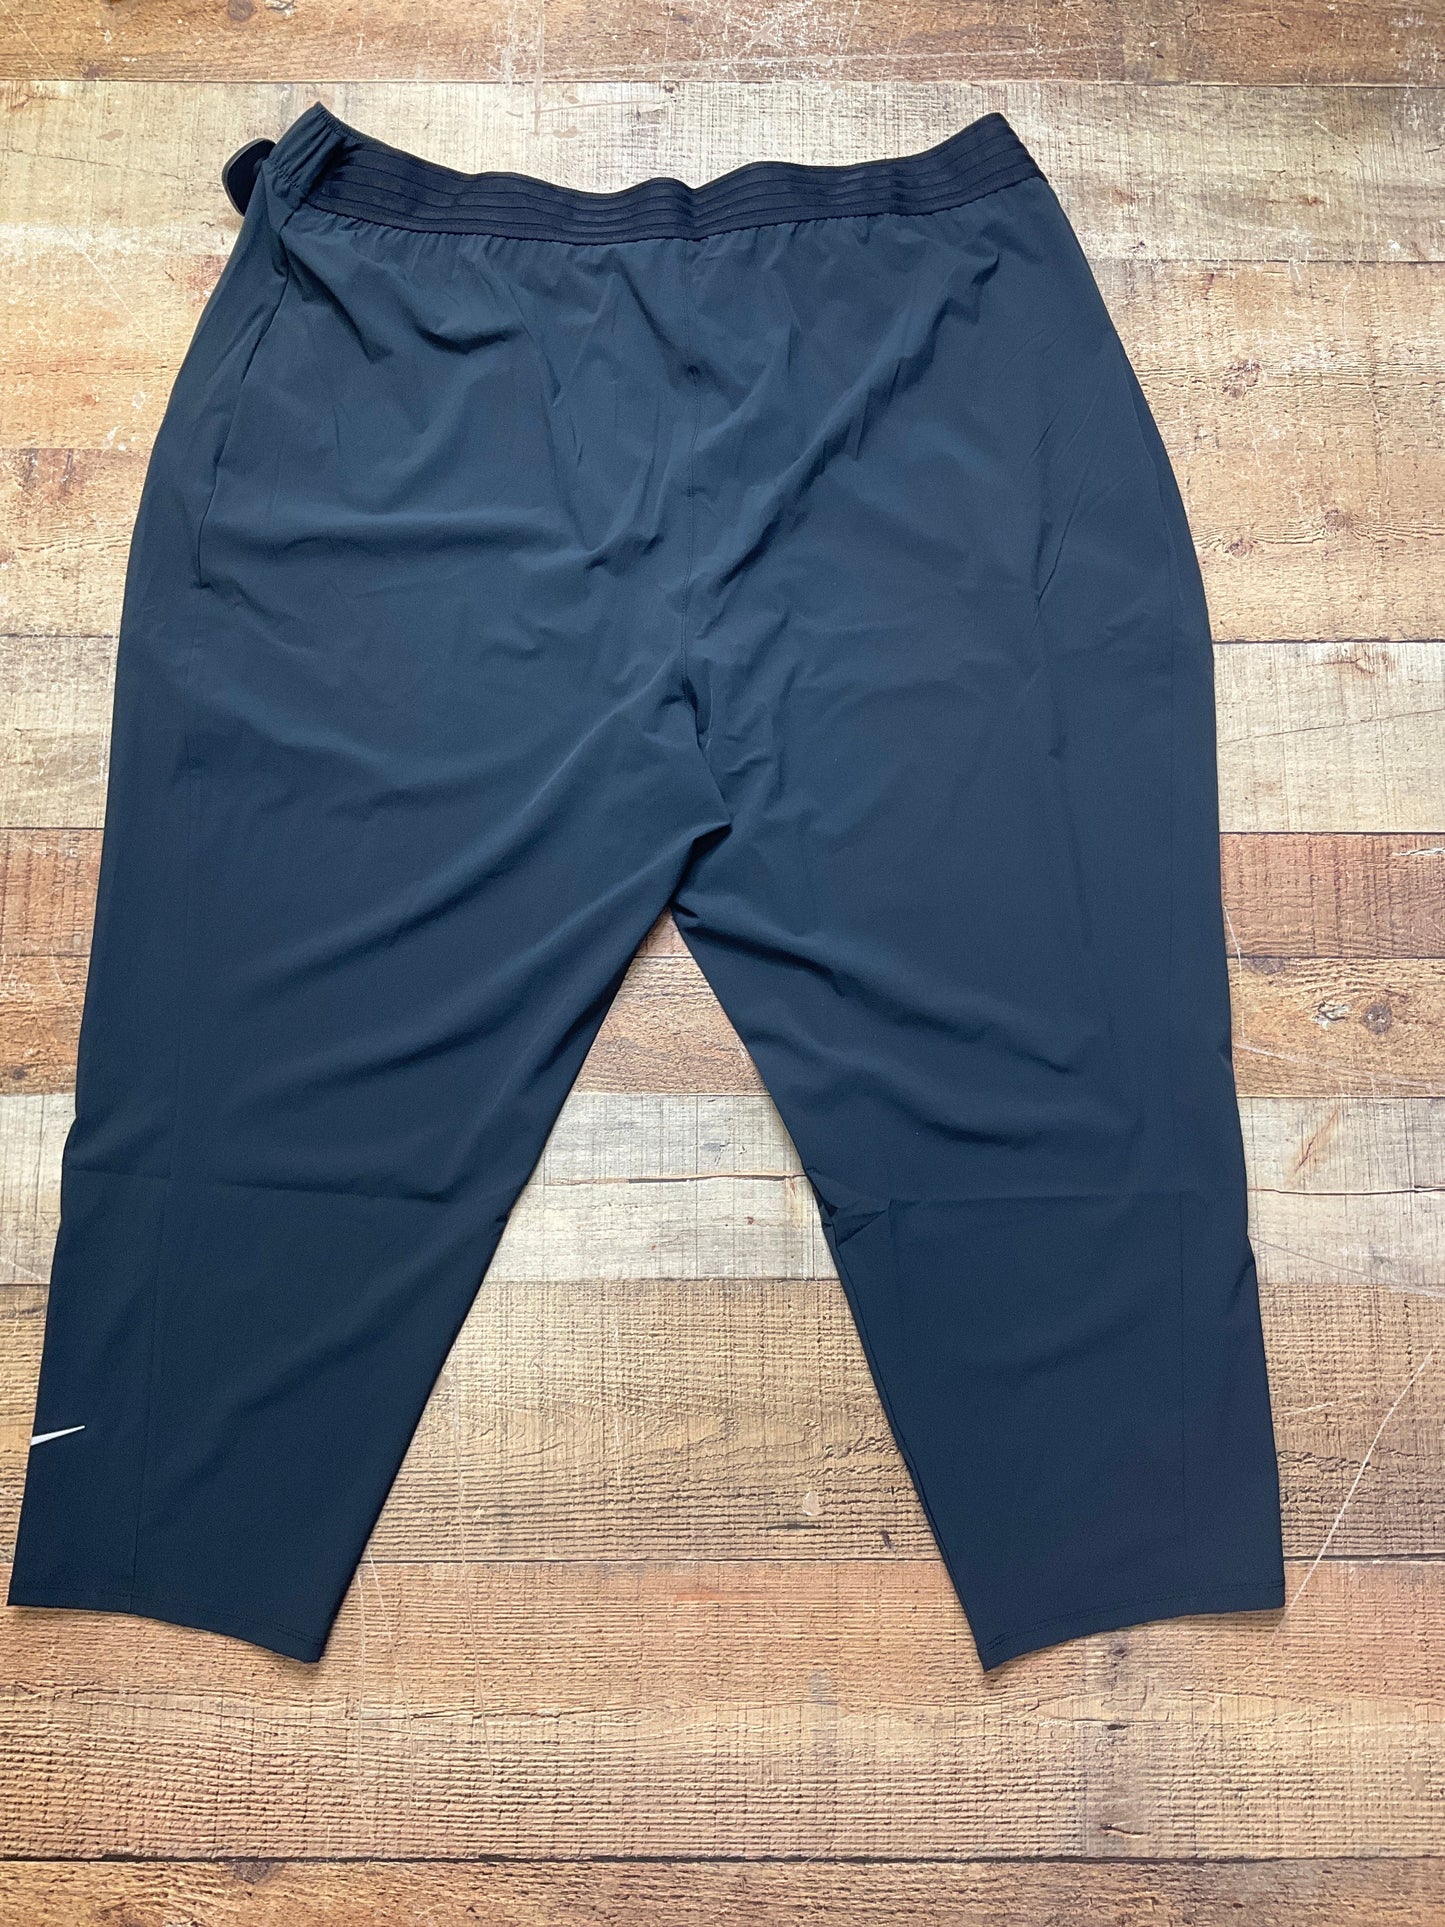 Athletic Pants By Nike Apparel  Size: 2x